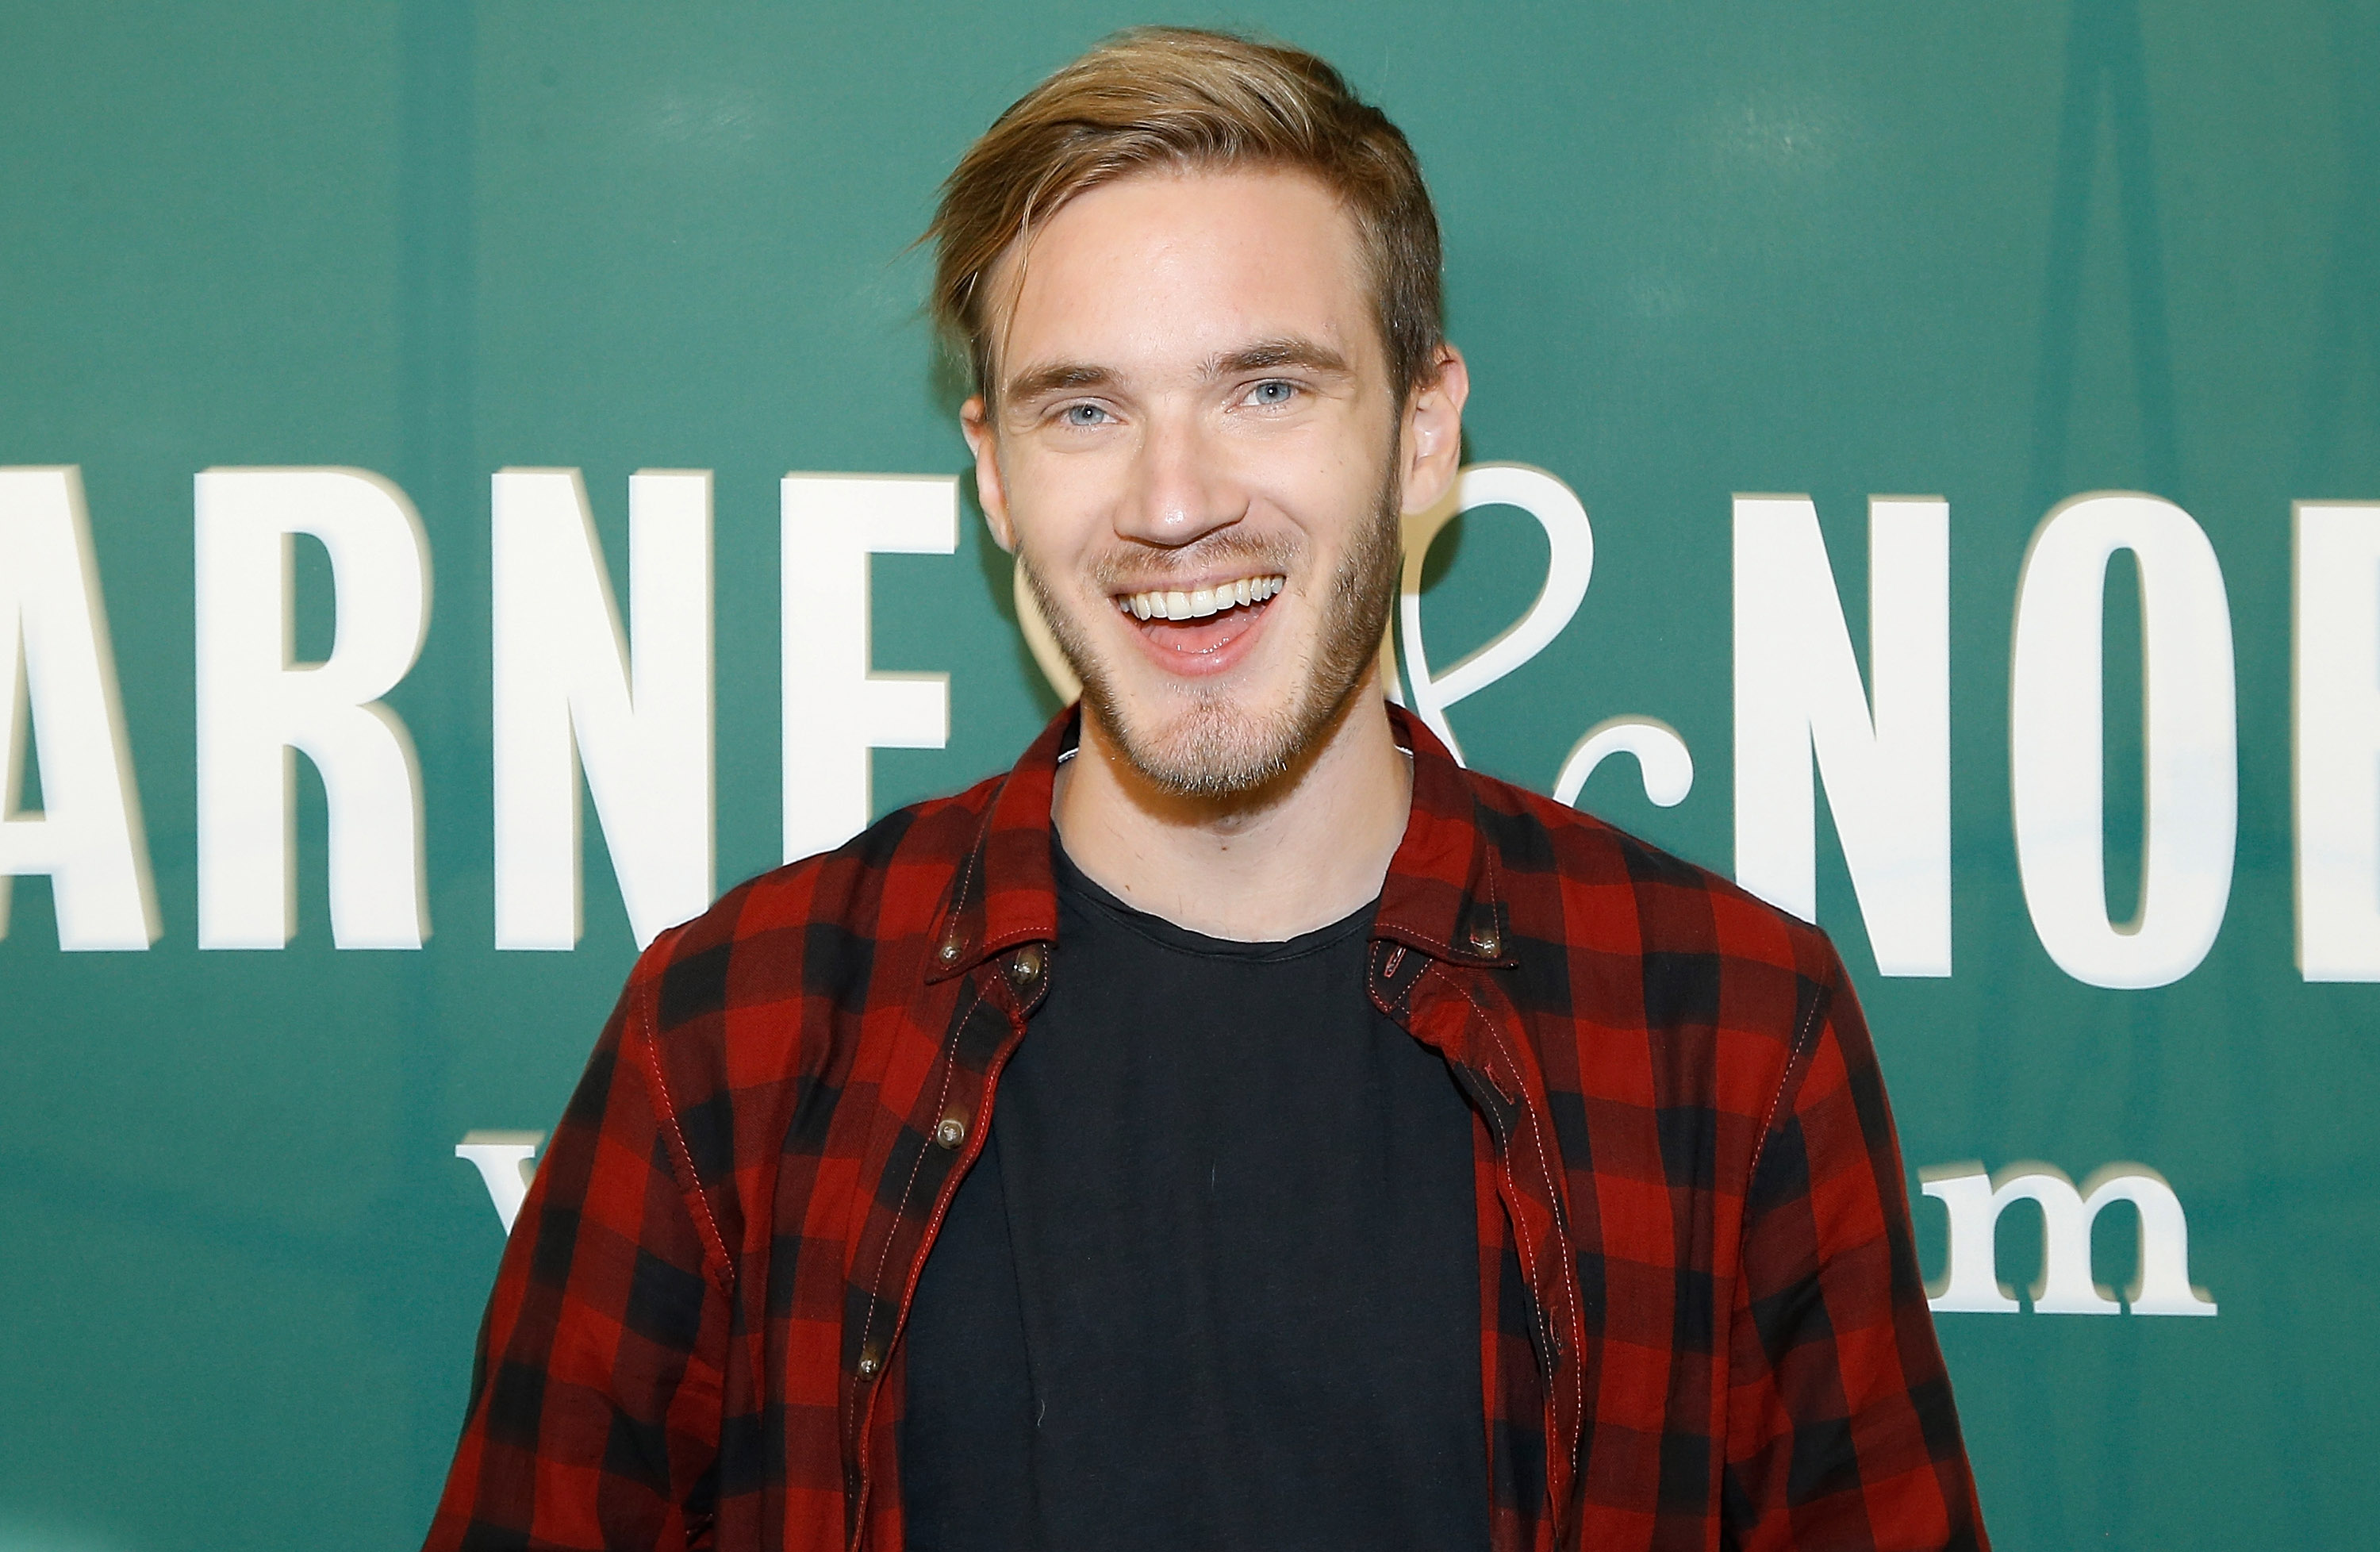 PewDiePie signs copies of his new book "This Book Loves You" at Barnes &amp; Noble Union Square on October 29, 2015 in New York City. (John Lamparski&mdash;Getty Images)